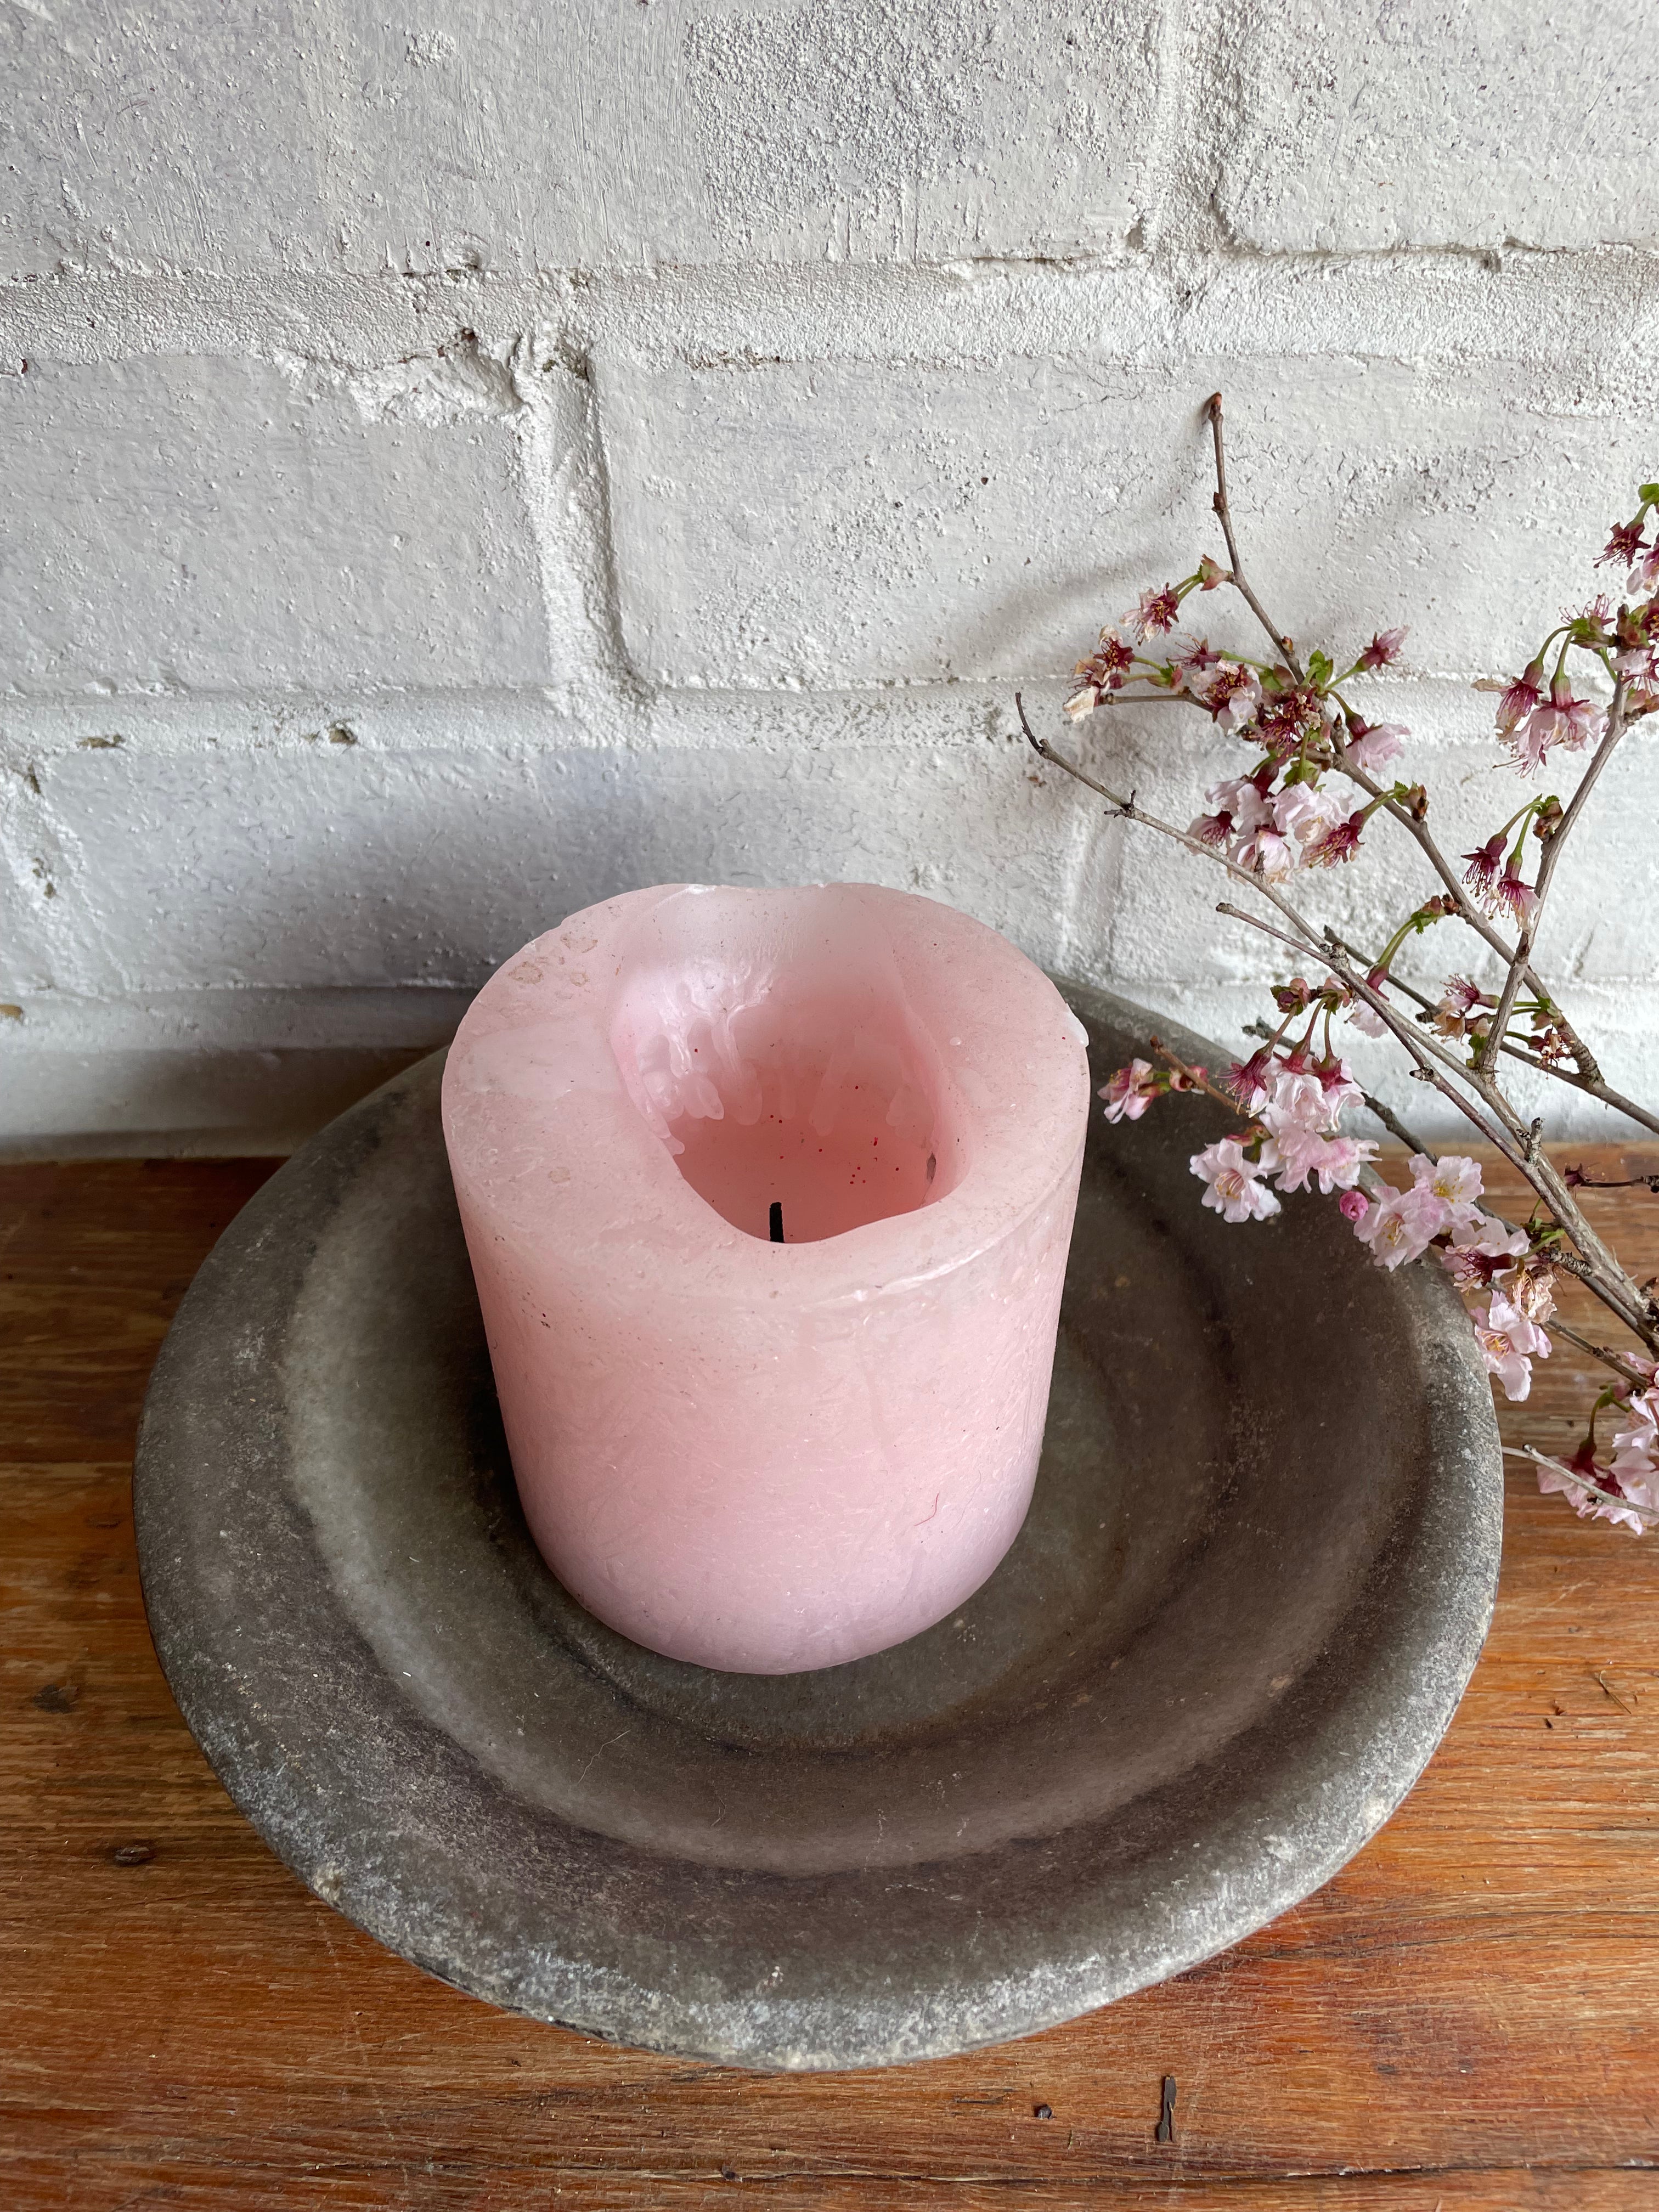 Antique Marble Stone Bowl: Grey Hues